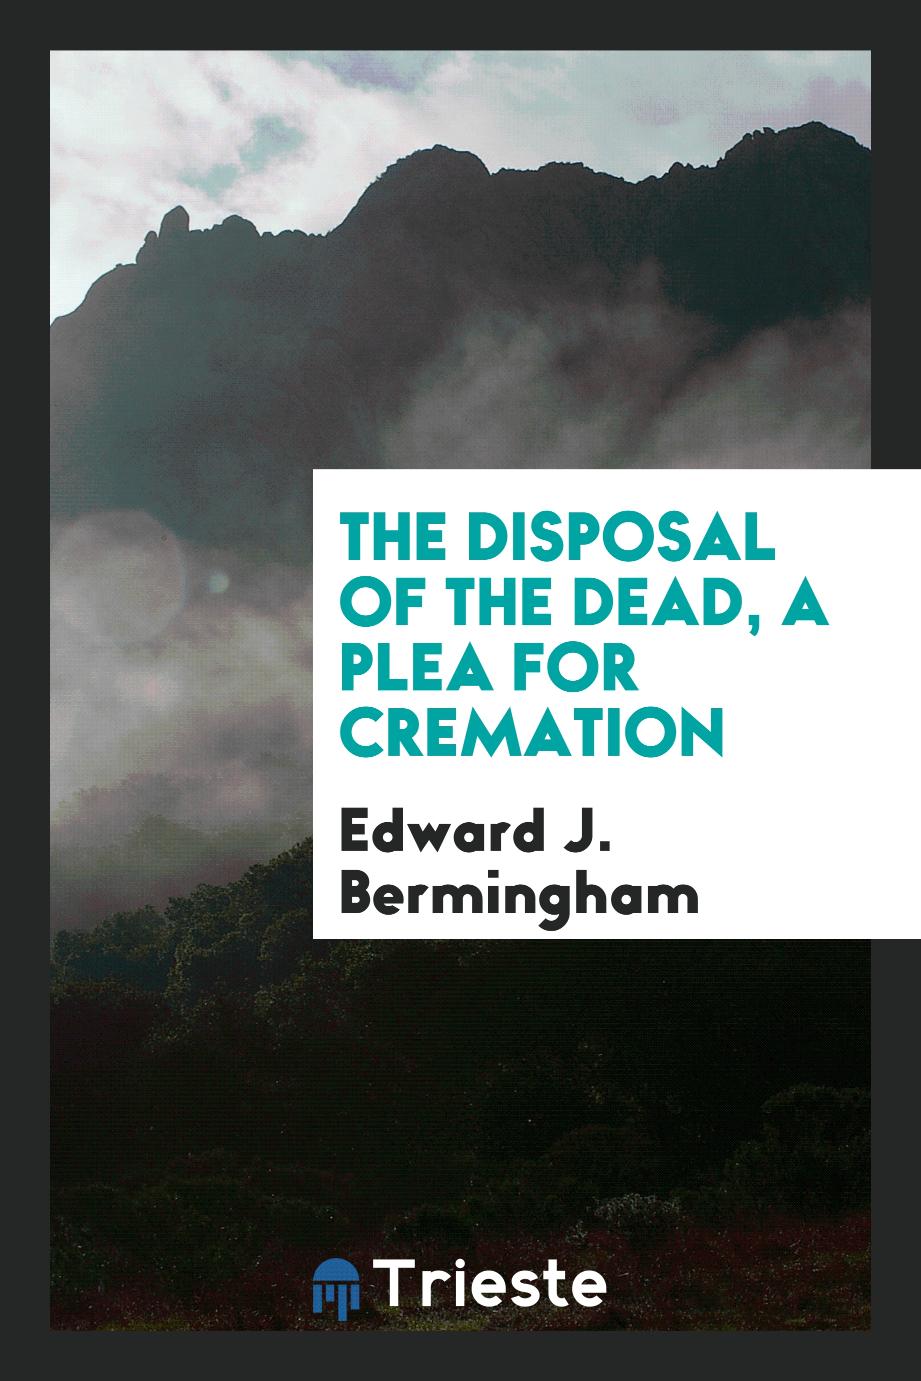 The Disposal of the dead, a plea for cremation